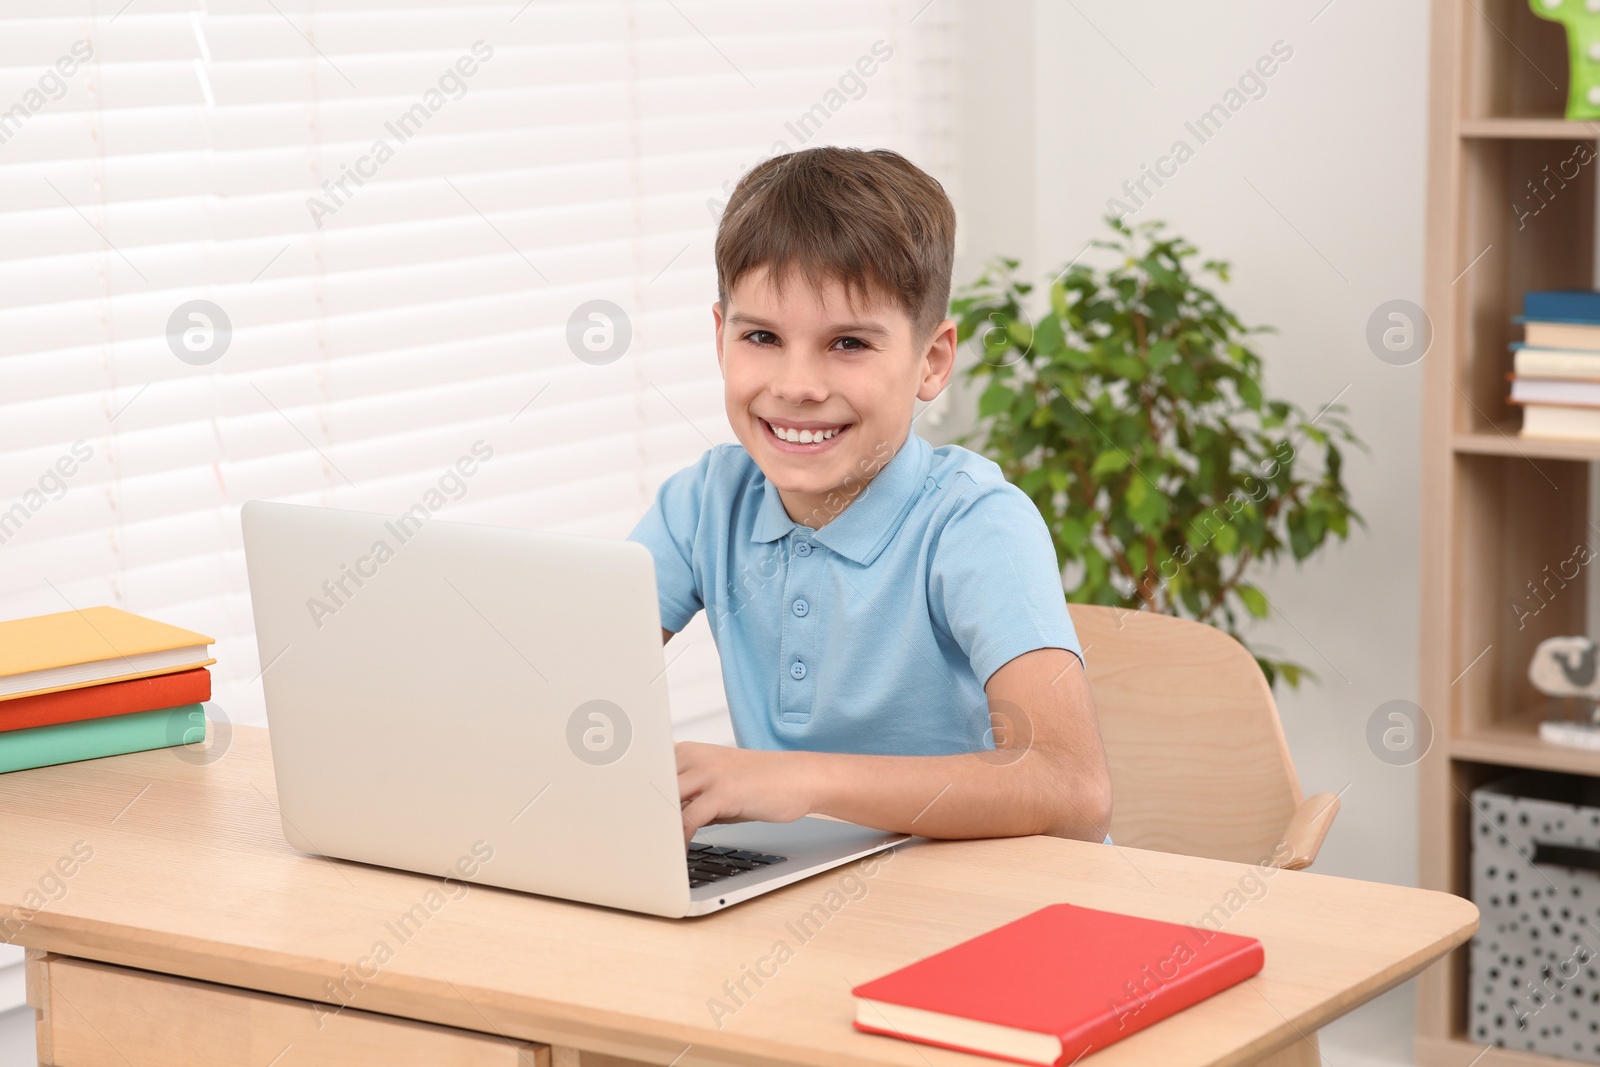 Photo of Smiling boy using laptop at desk in room. Home workplace